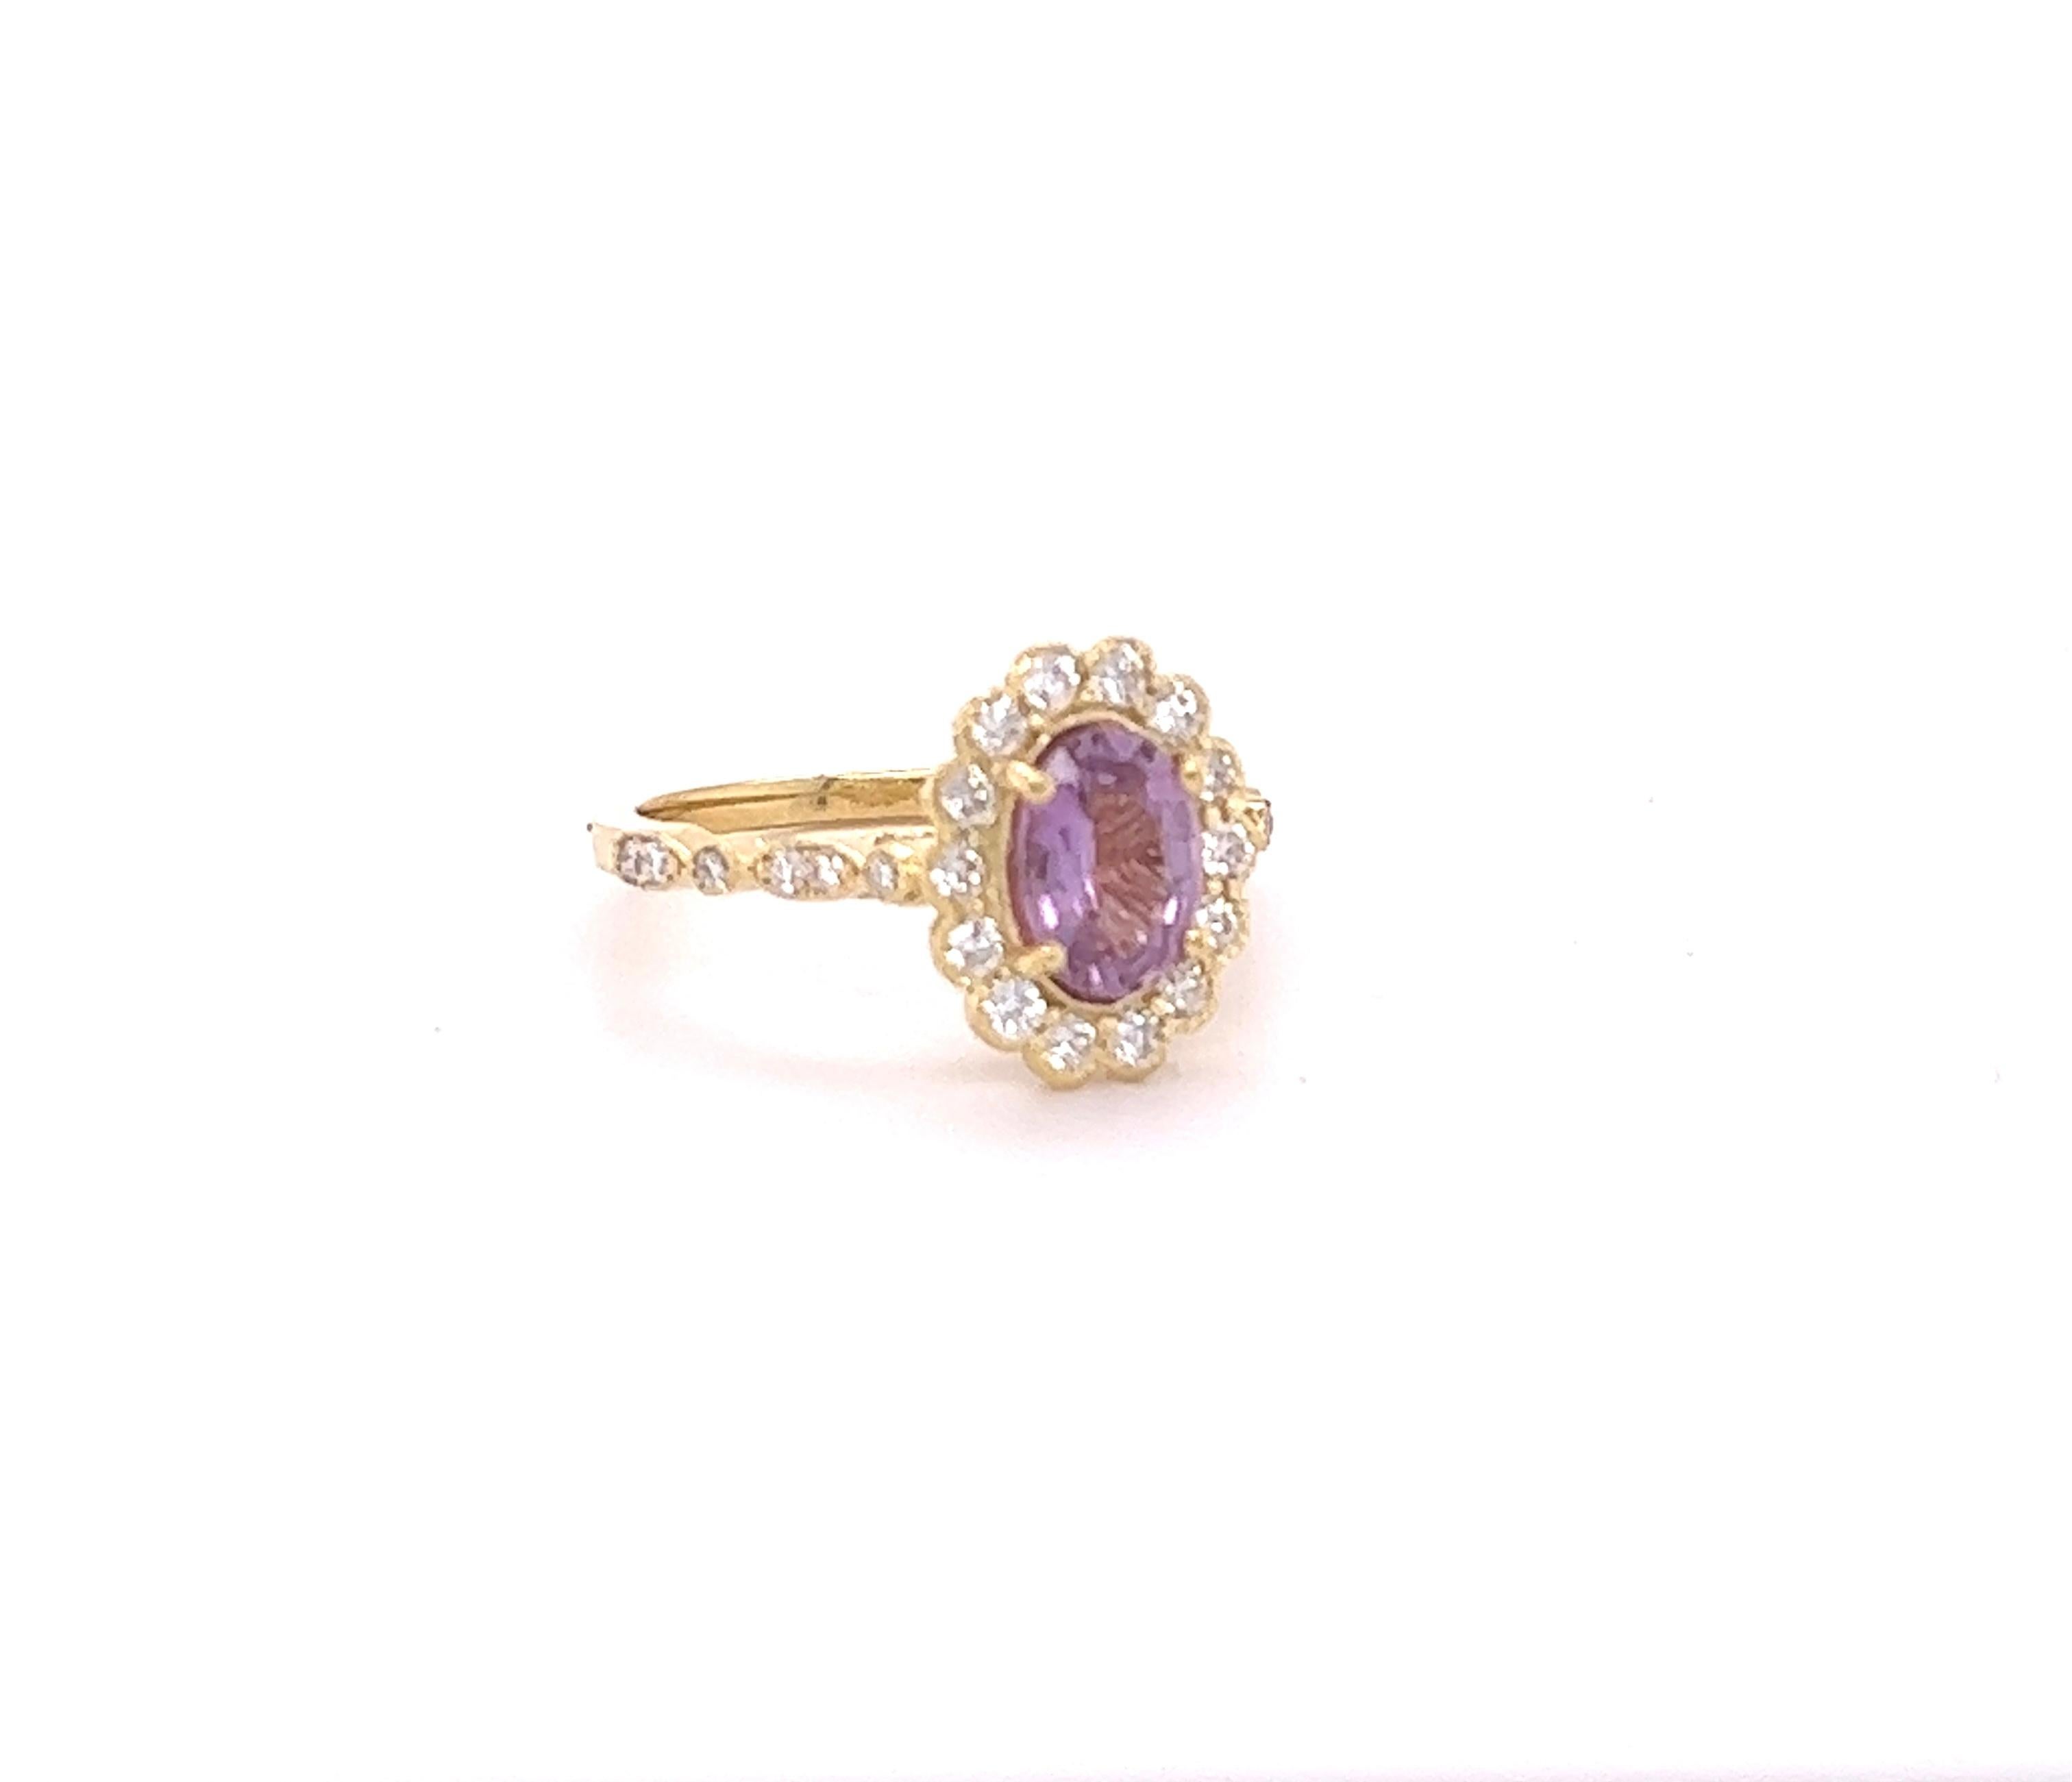 This beautiful ring has a Natural Oval Cut Purplish Pink Sapphire that weights 1.22 Carats. 

The ring is embellished with 26 Round Cut Diamonds that weigh 0.49 Carats with a clarity and color of VS/H. 
The total carat weight of the ring is 1.71